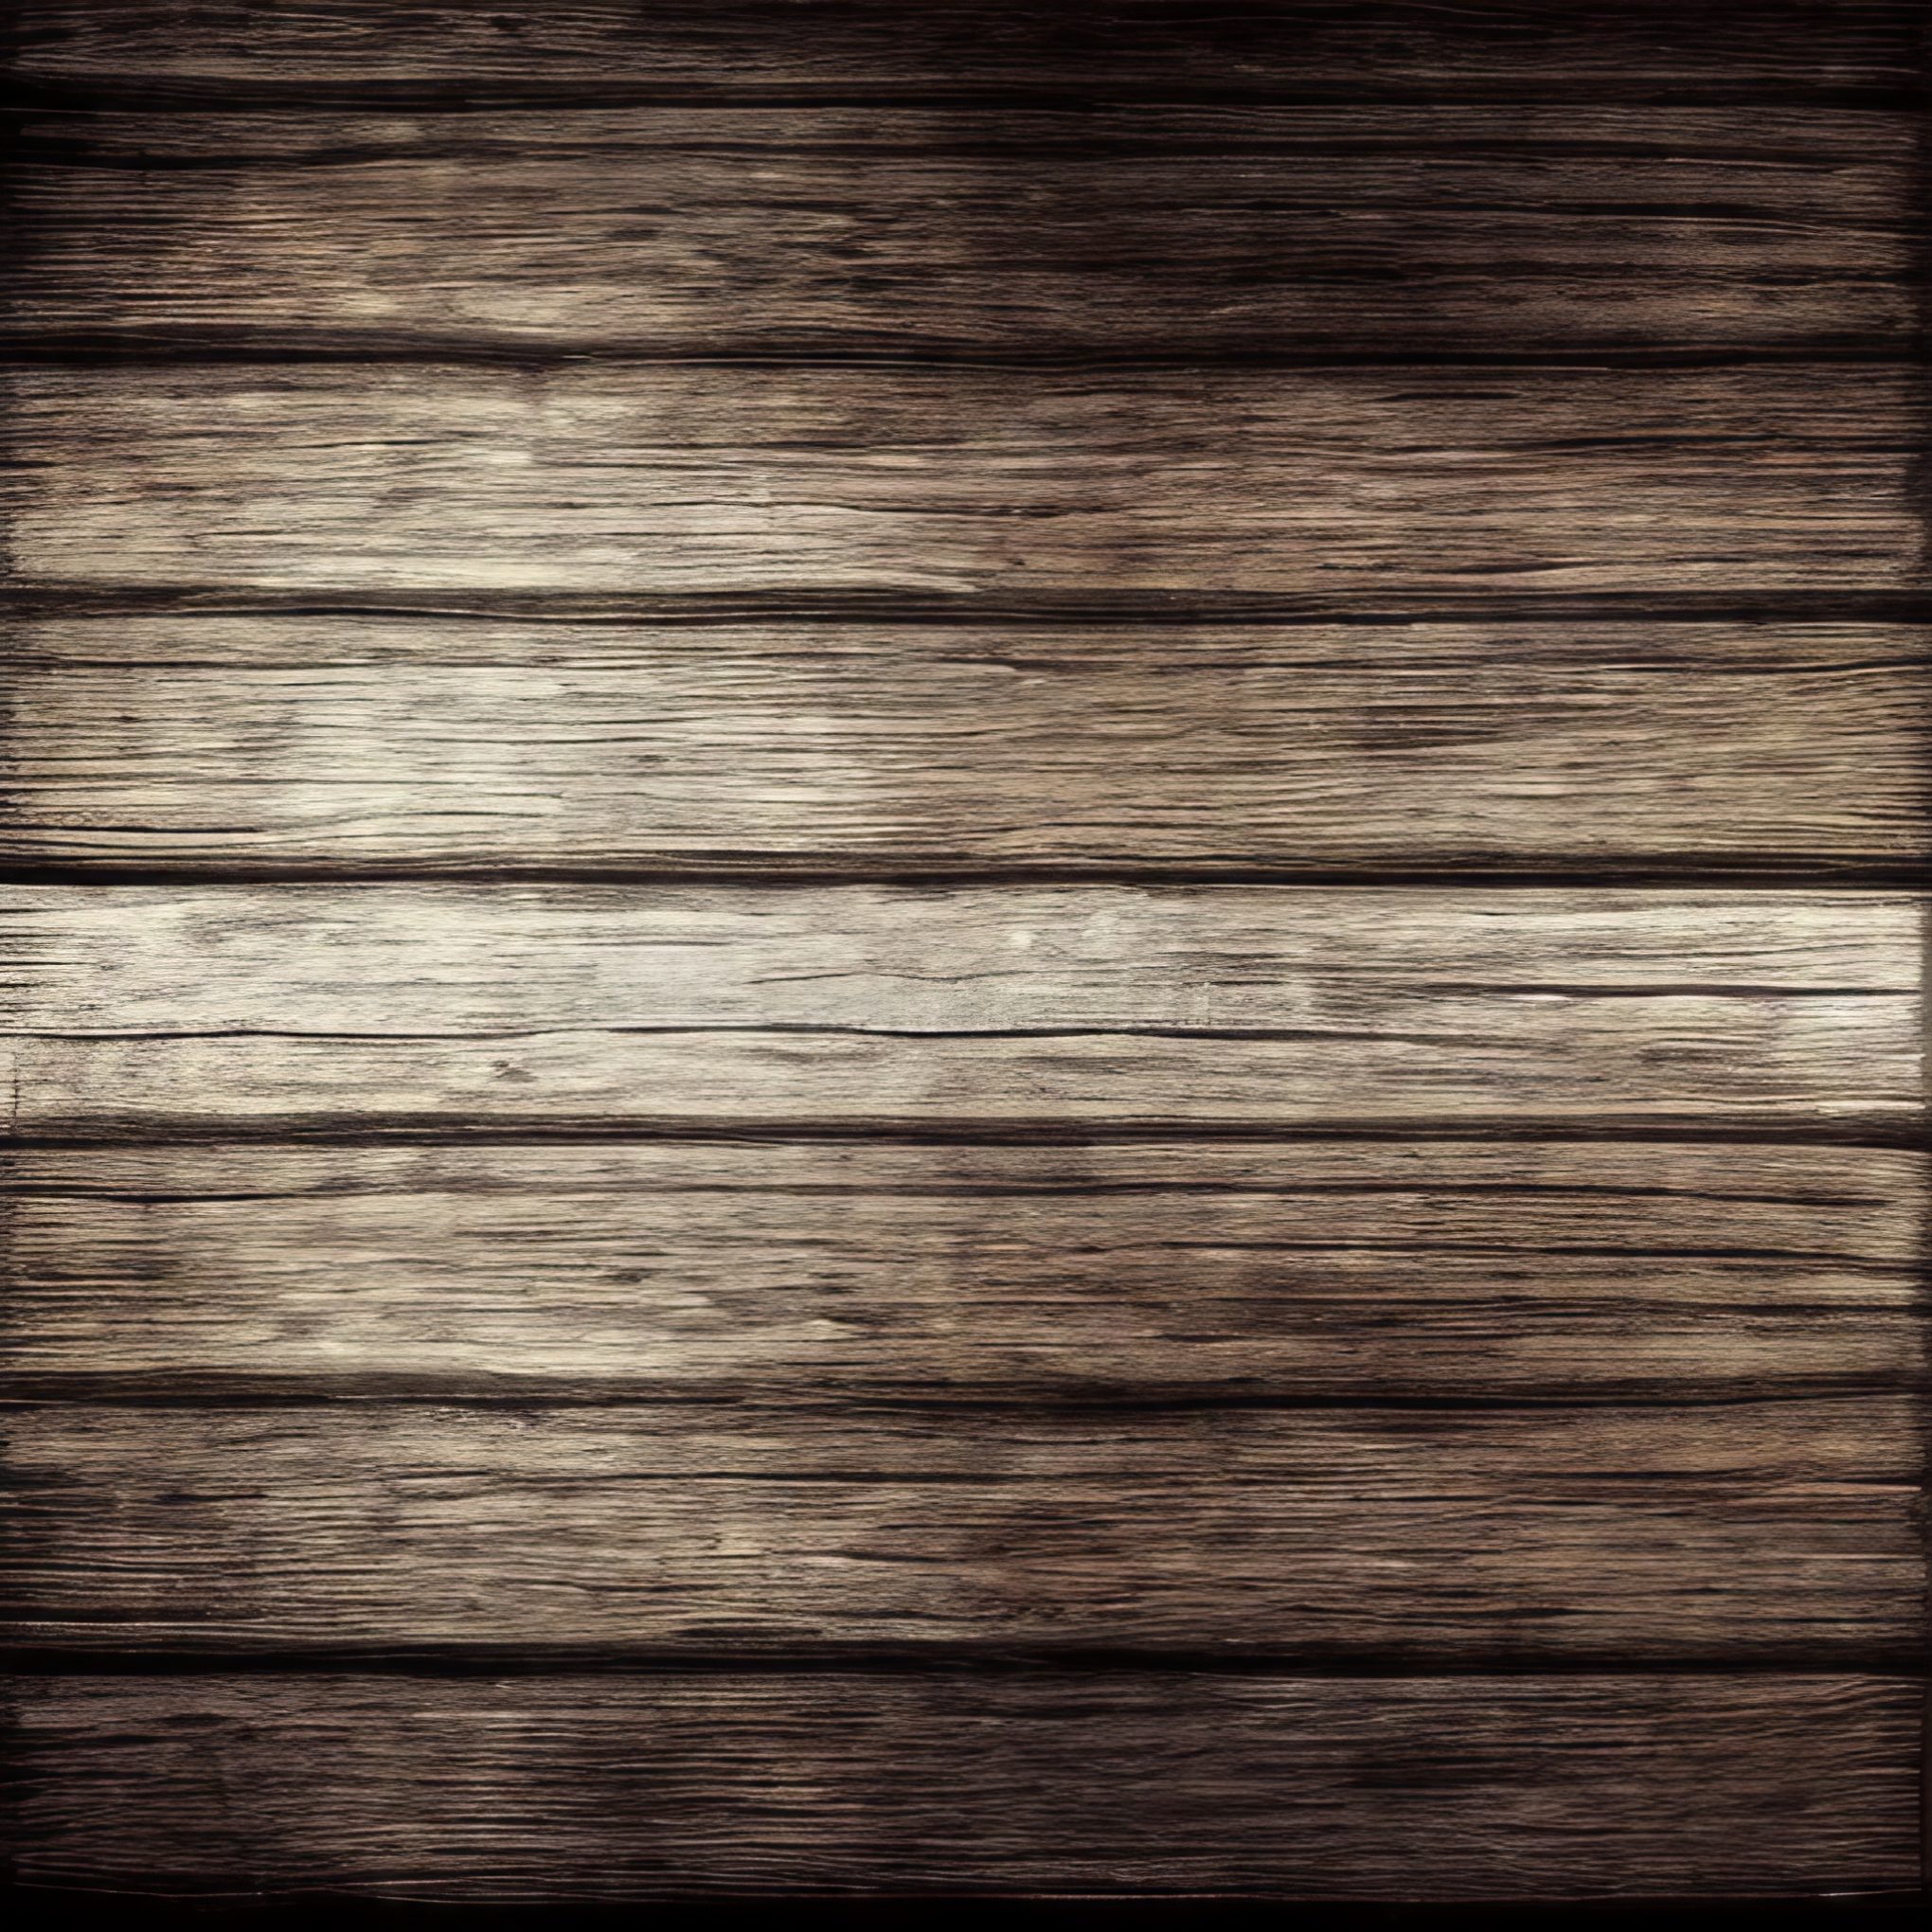 Old grunge dirty wooden plank floorboards Free Stock Picture